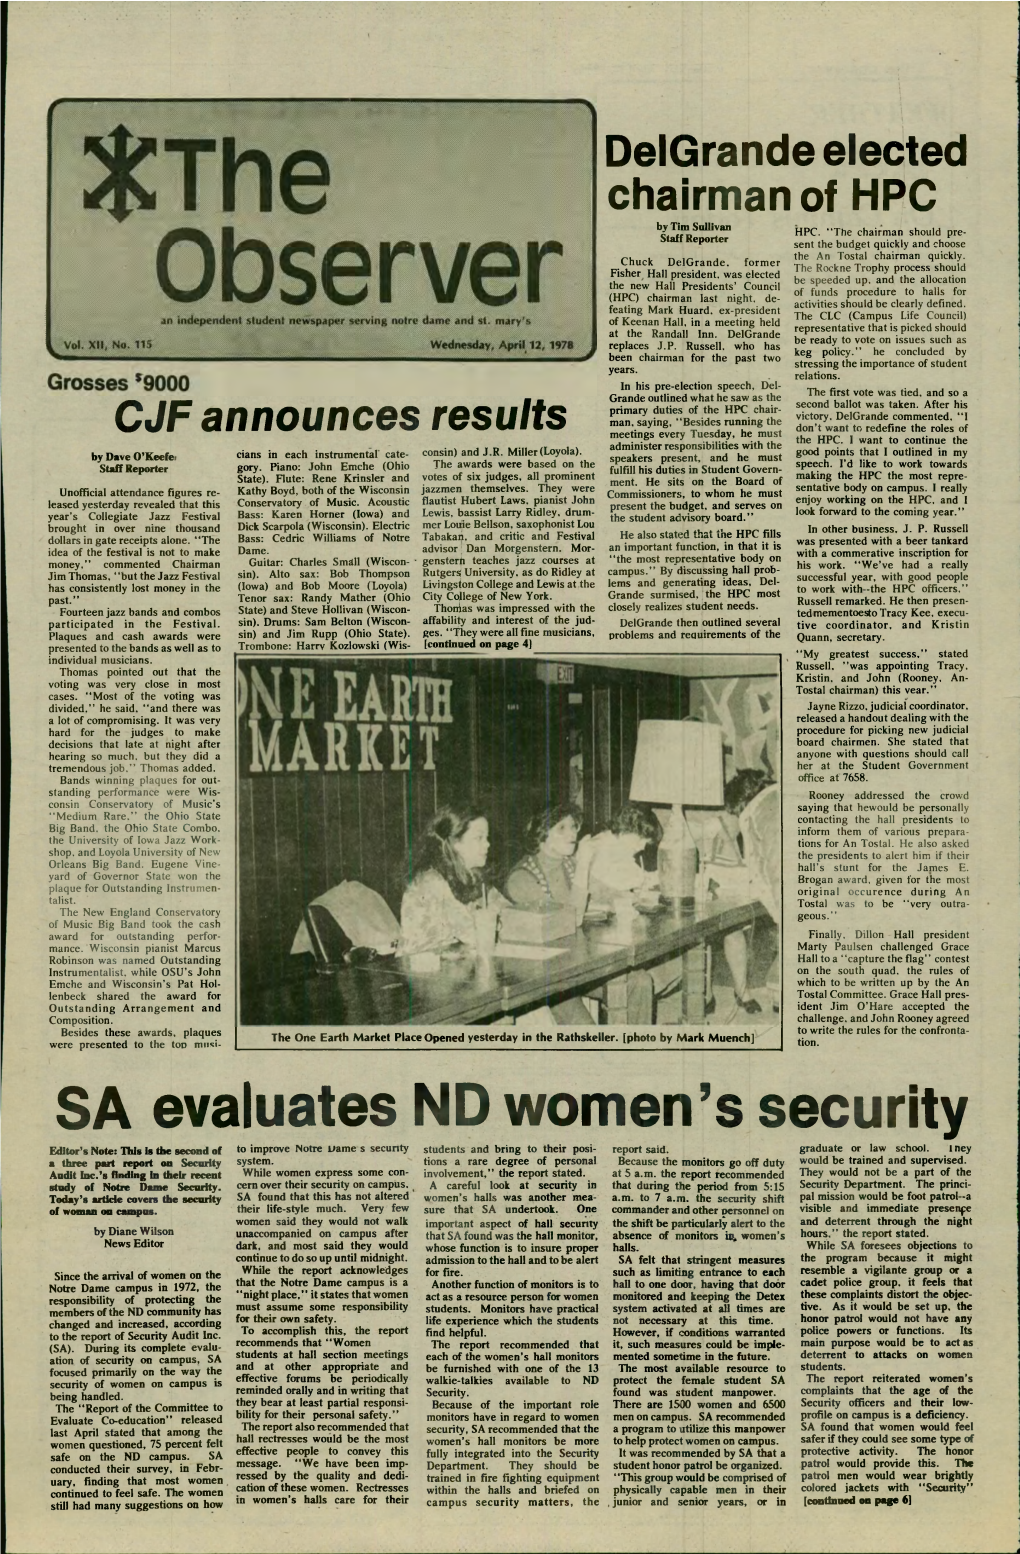 SA Evaluates ND Women's Security